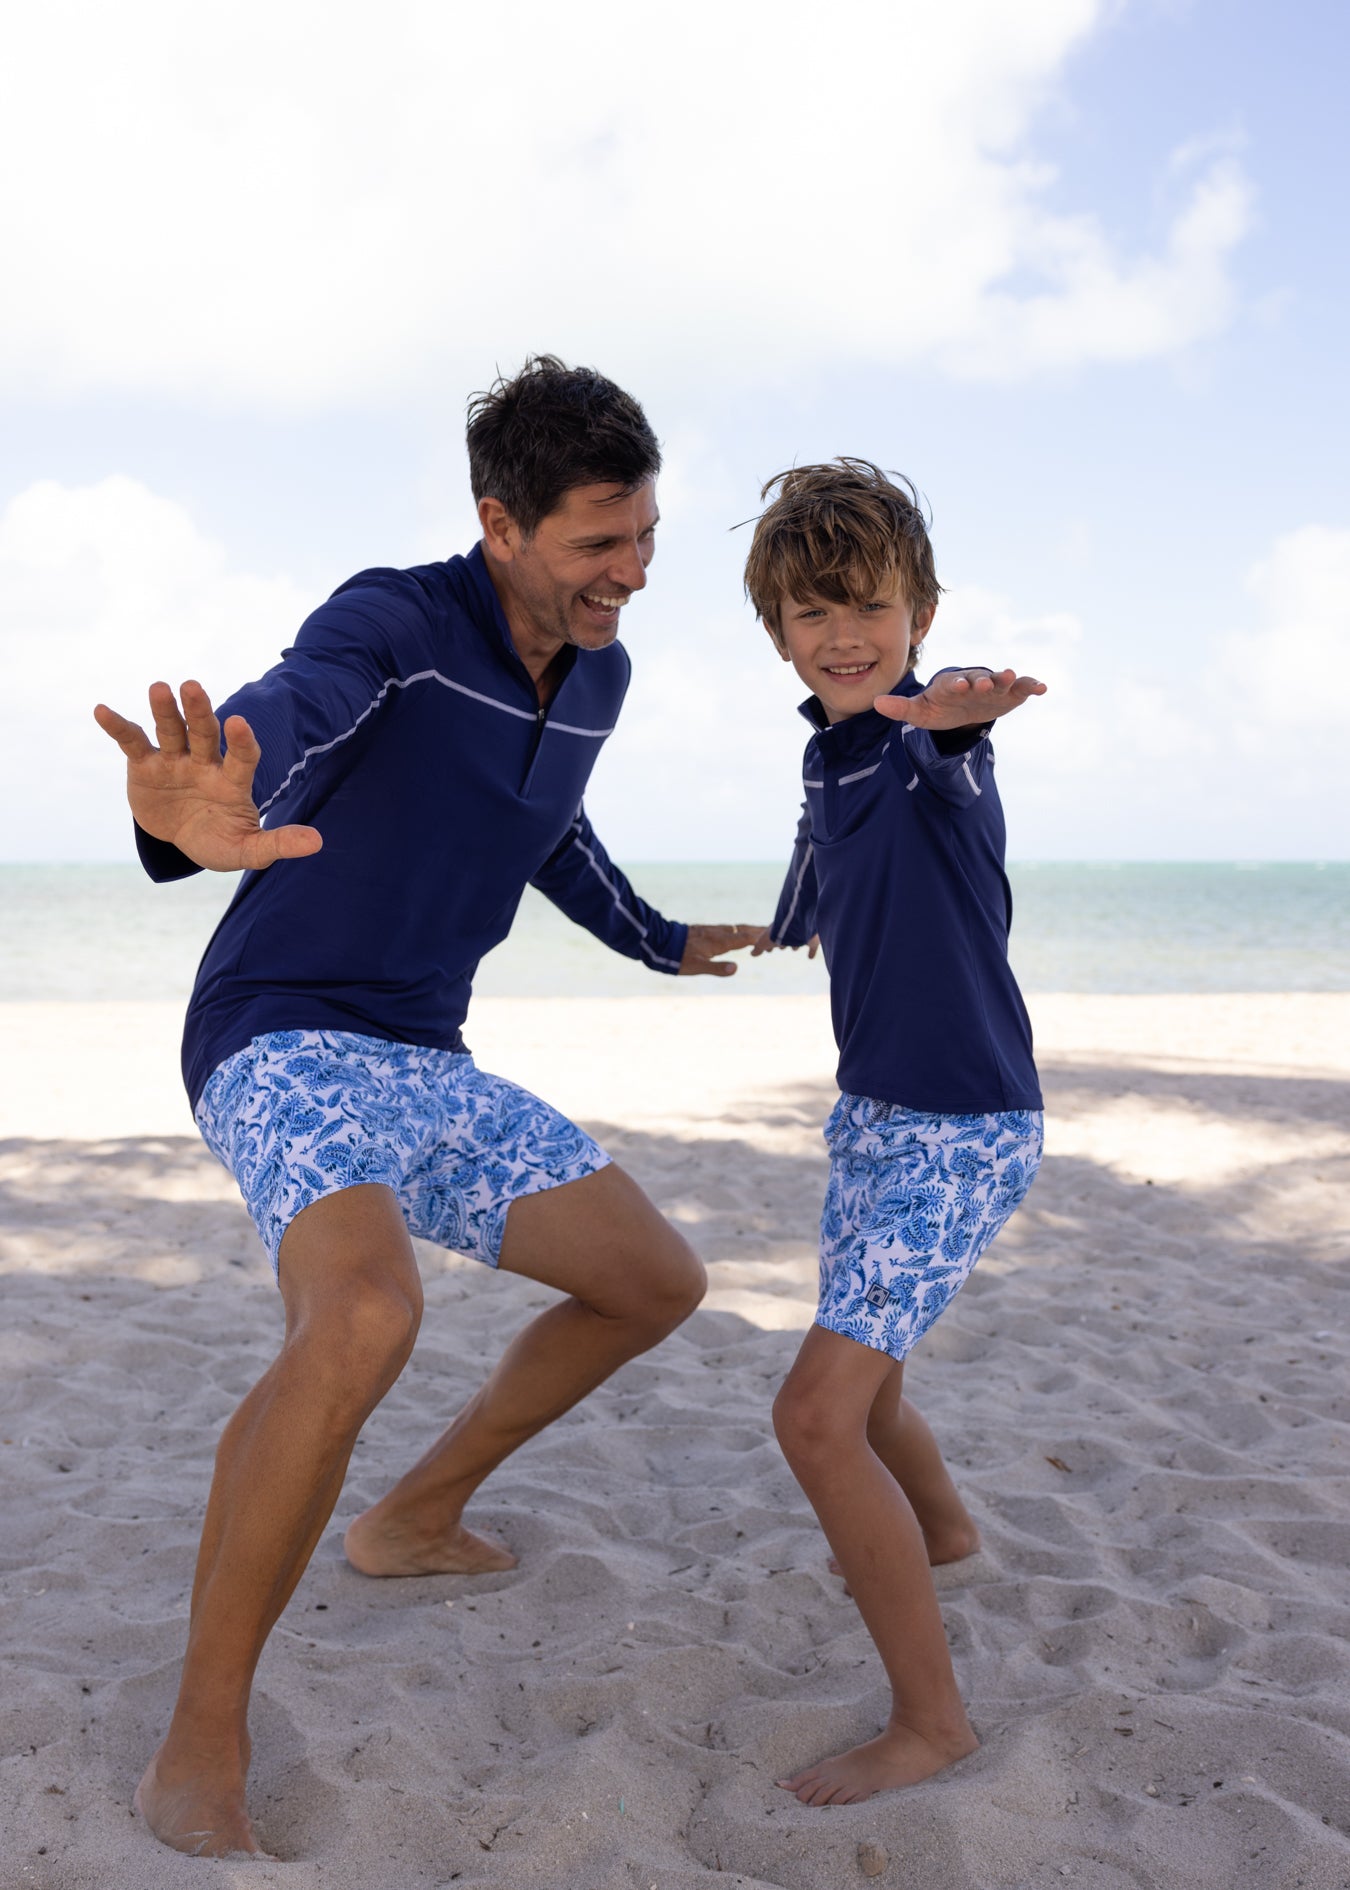 Father and son on beach wearing Men's Charleston Paisley Swim Trunks with Men's Navy Sport Zip Top and Boys Navy Sport Zip Top with Boys Charleston Paisley Swim Trunks 